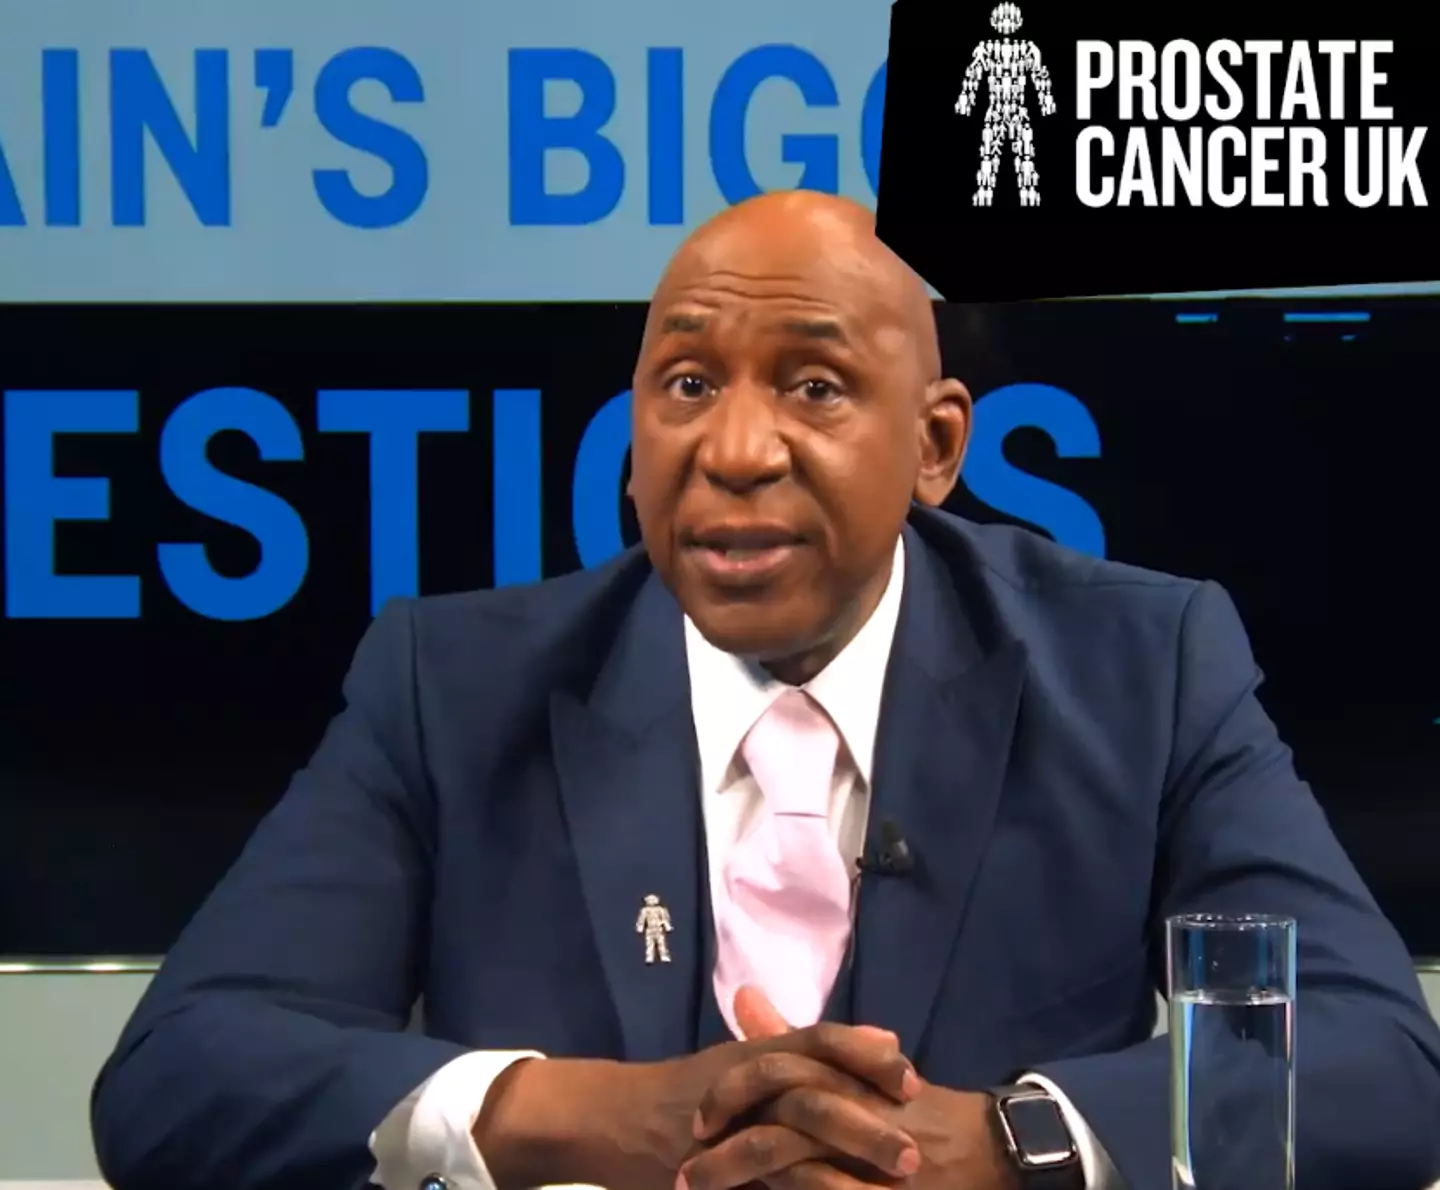 Colin McFarlane is raising awareness about prostate cancer.